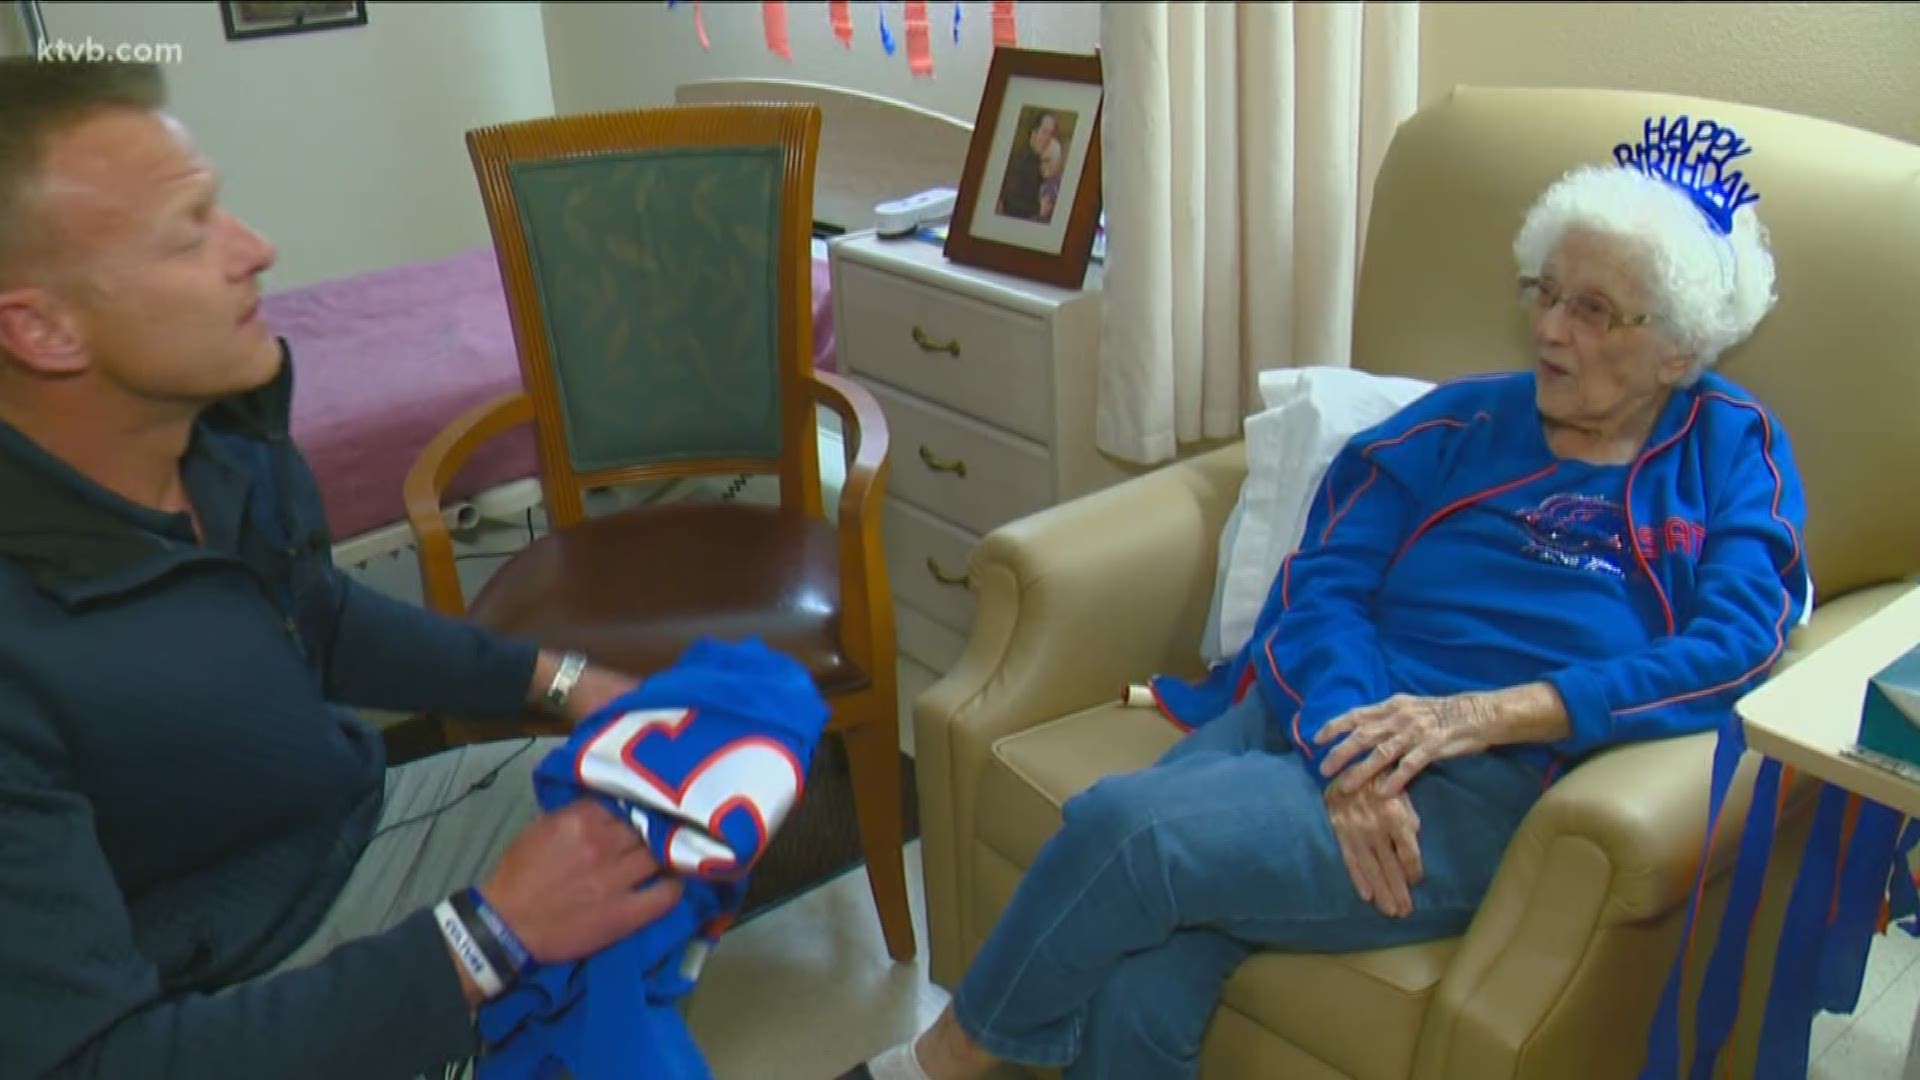 Coach Harsin heard the superfan was having health problems and surprised her at a Boise care facility on her special birthday.